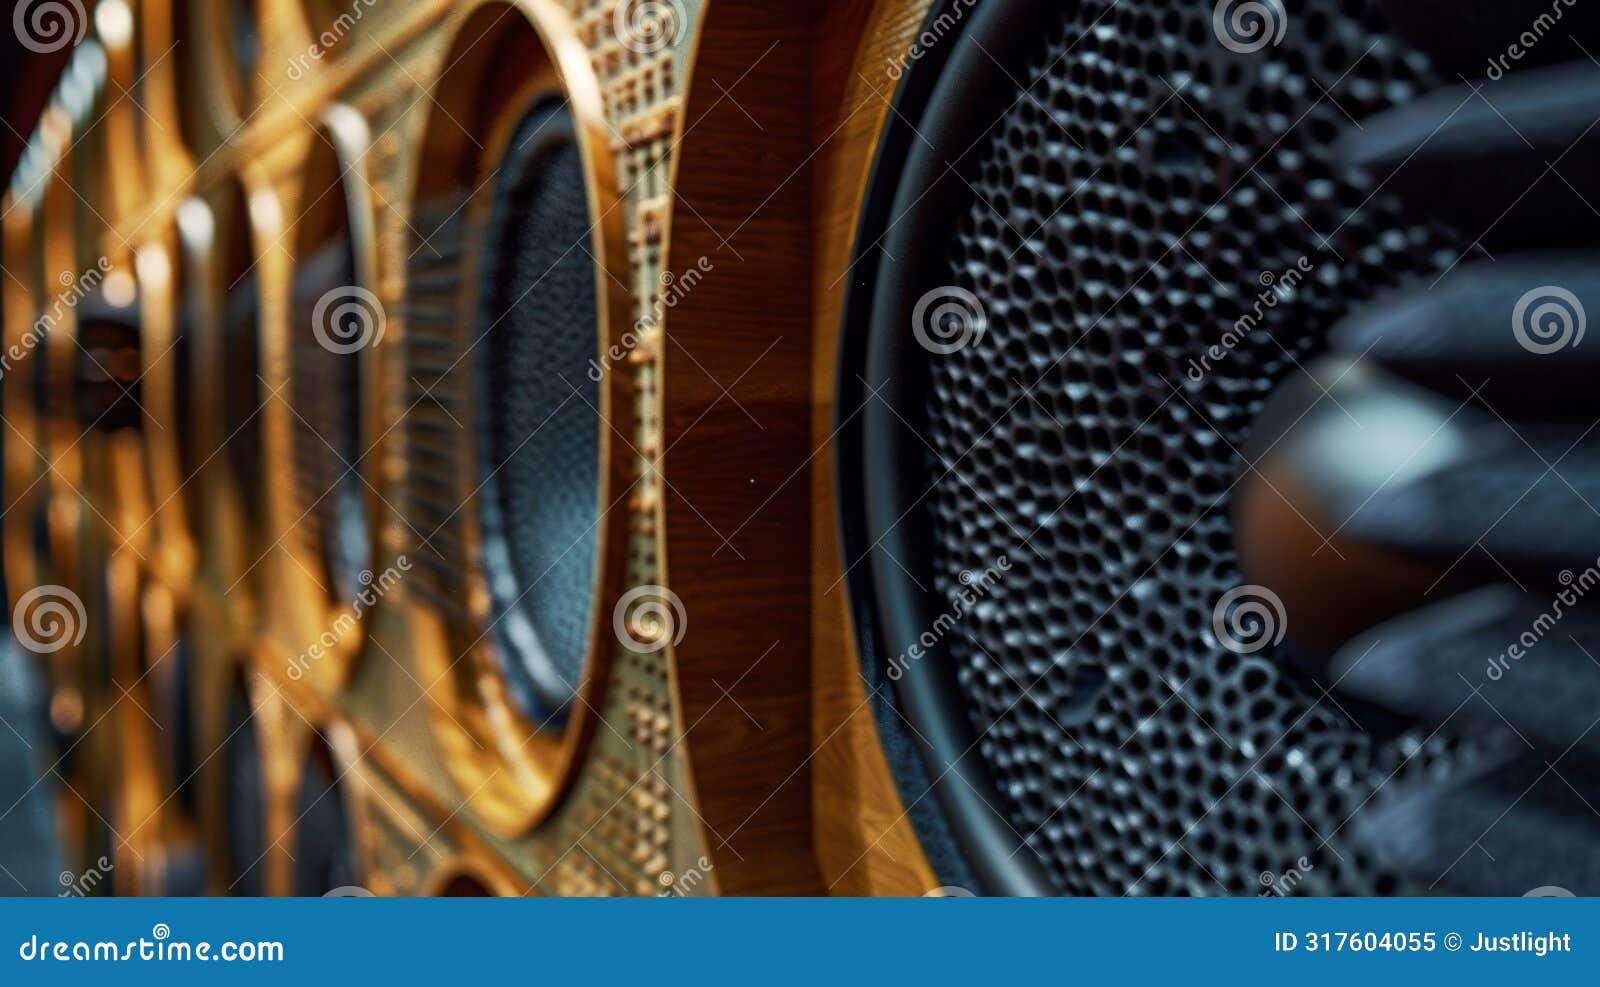 step inside our soundproof listening booths and immerse yourself in the world of music